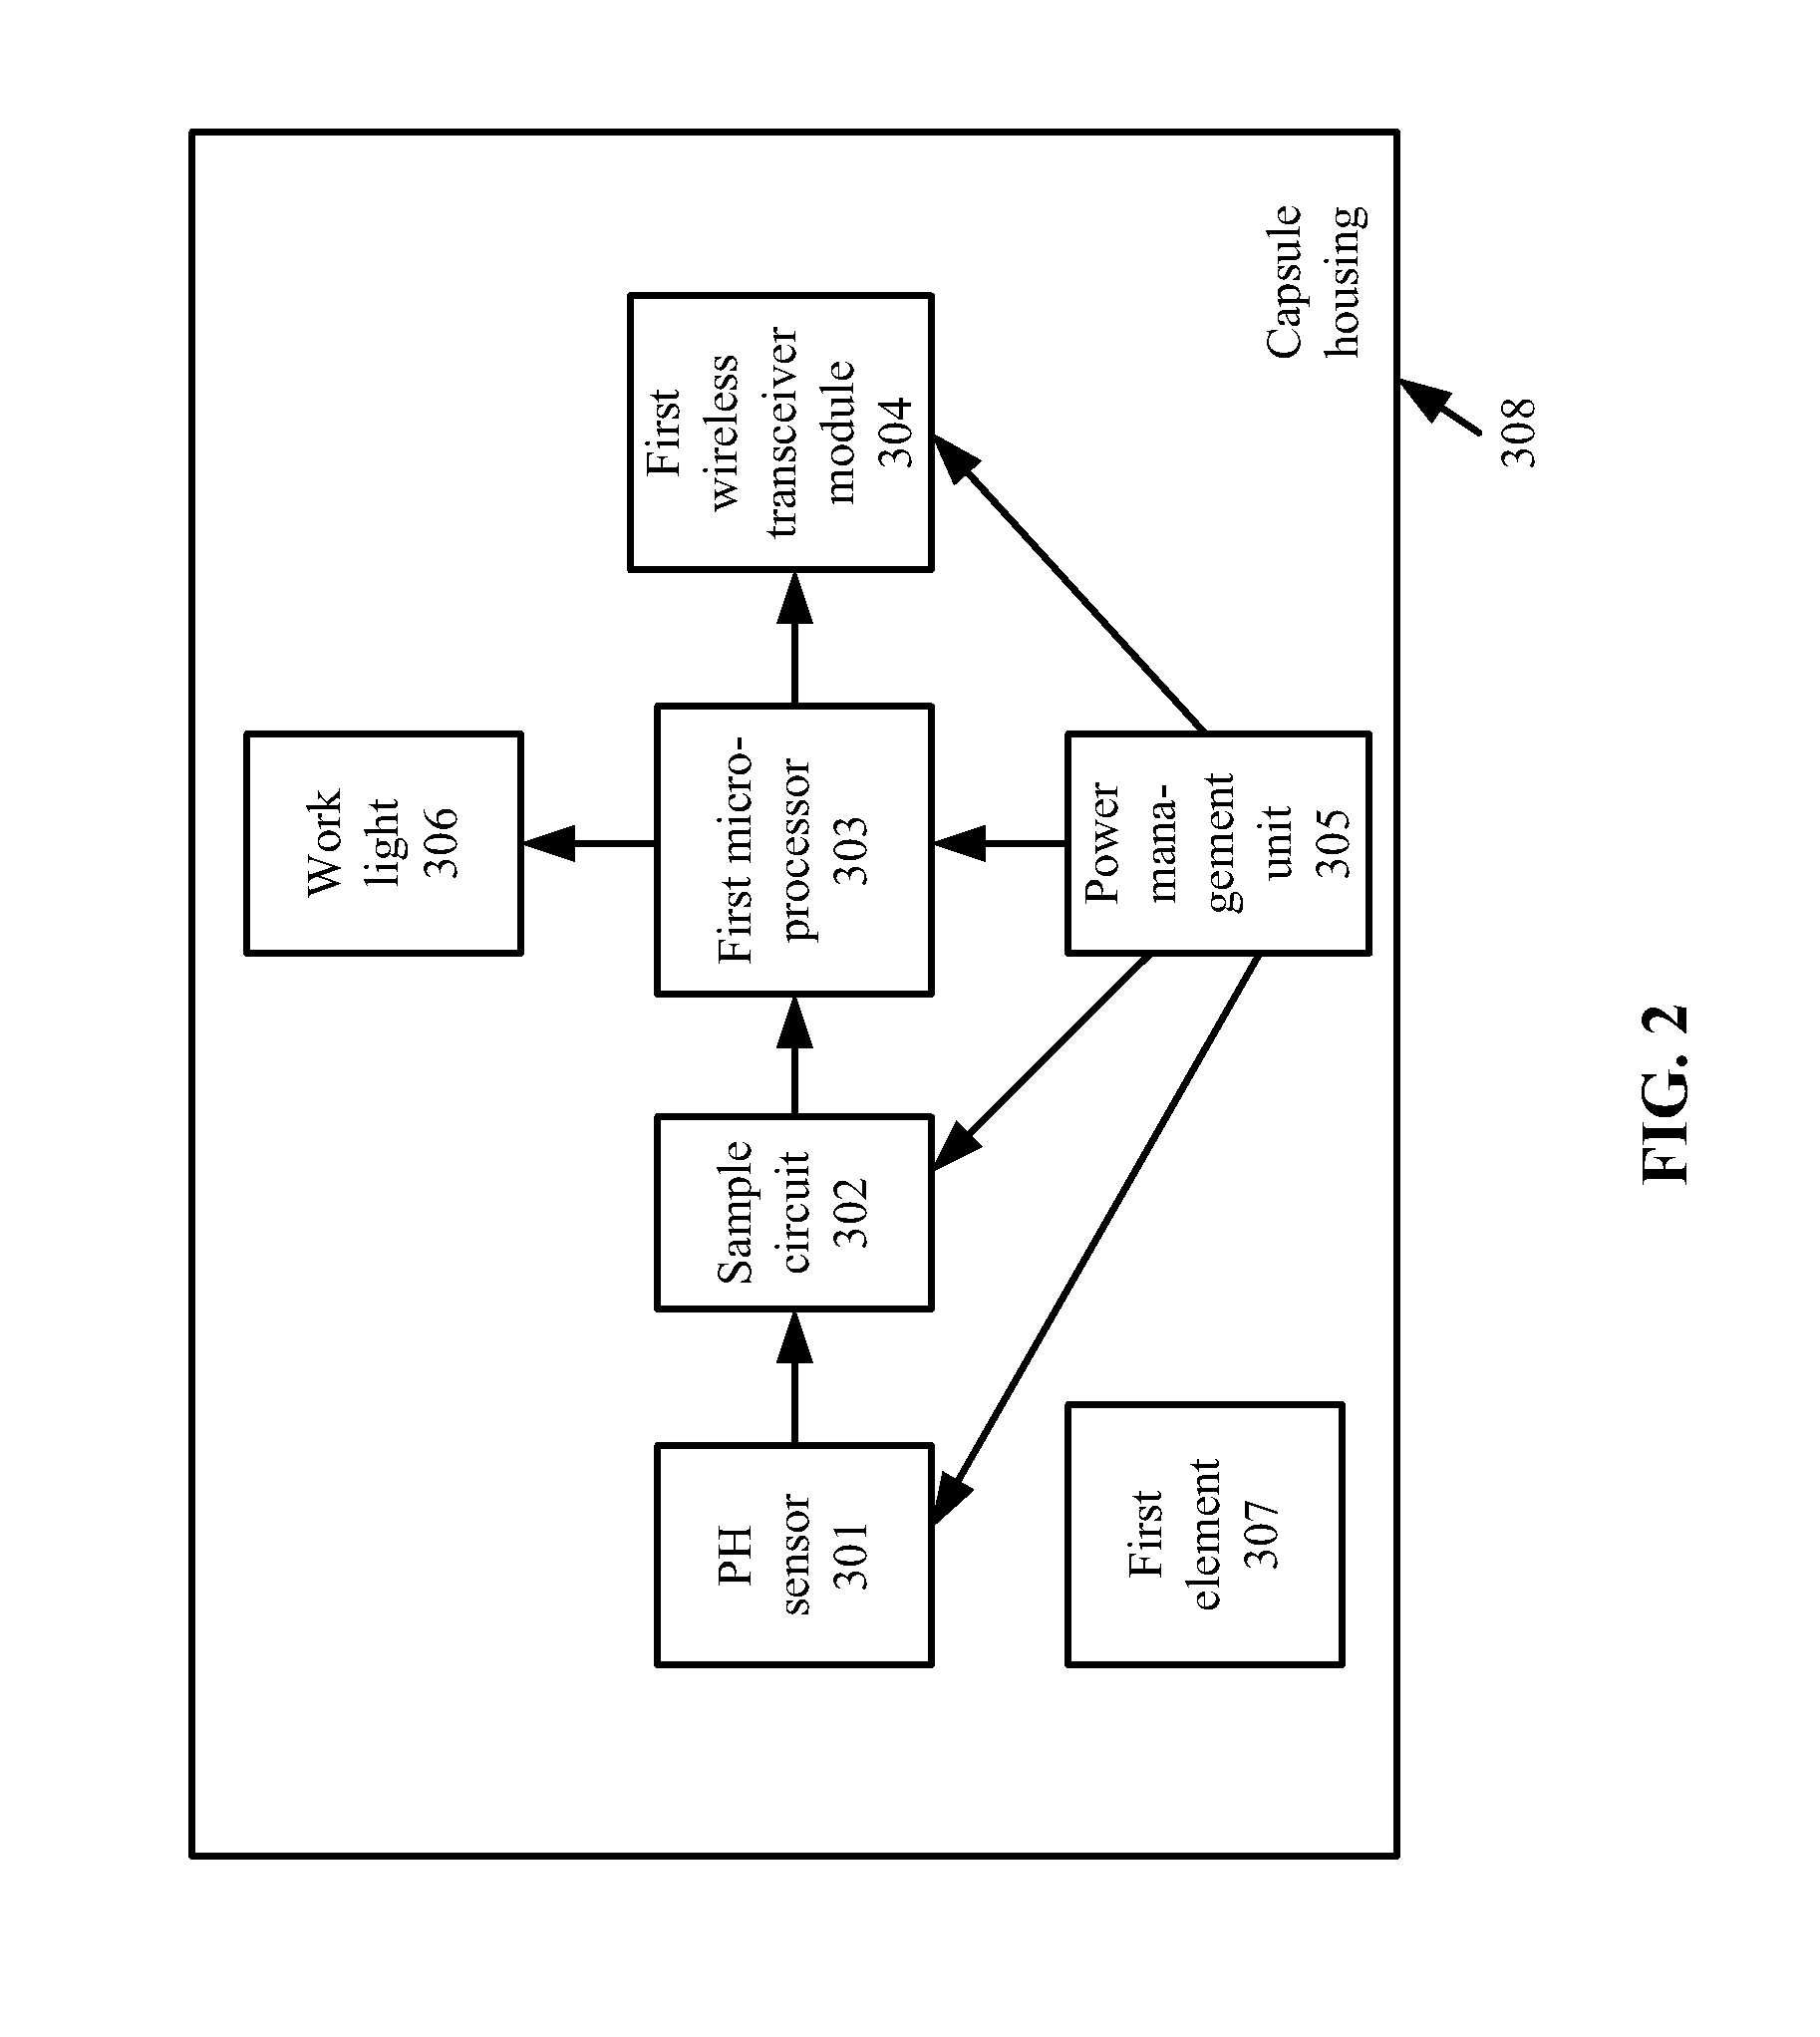 POSITIONING SYSTEM, APPARATUS, AND METHOD FOR WIRELESS MONITORING OF ESOPHAGEAL pH VALUE